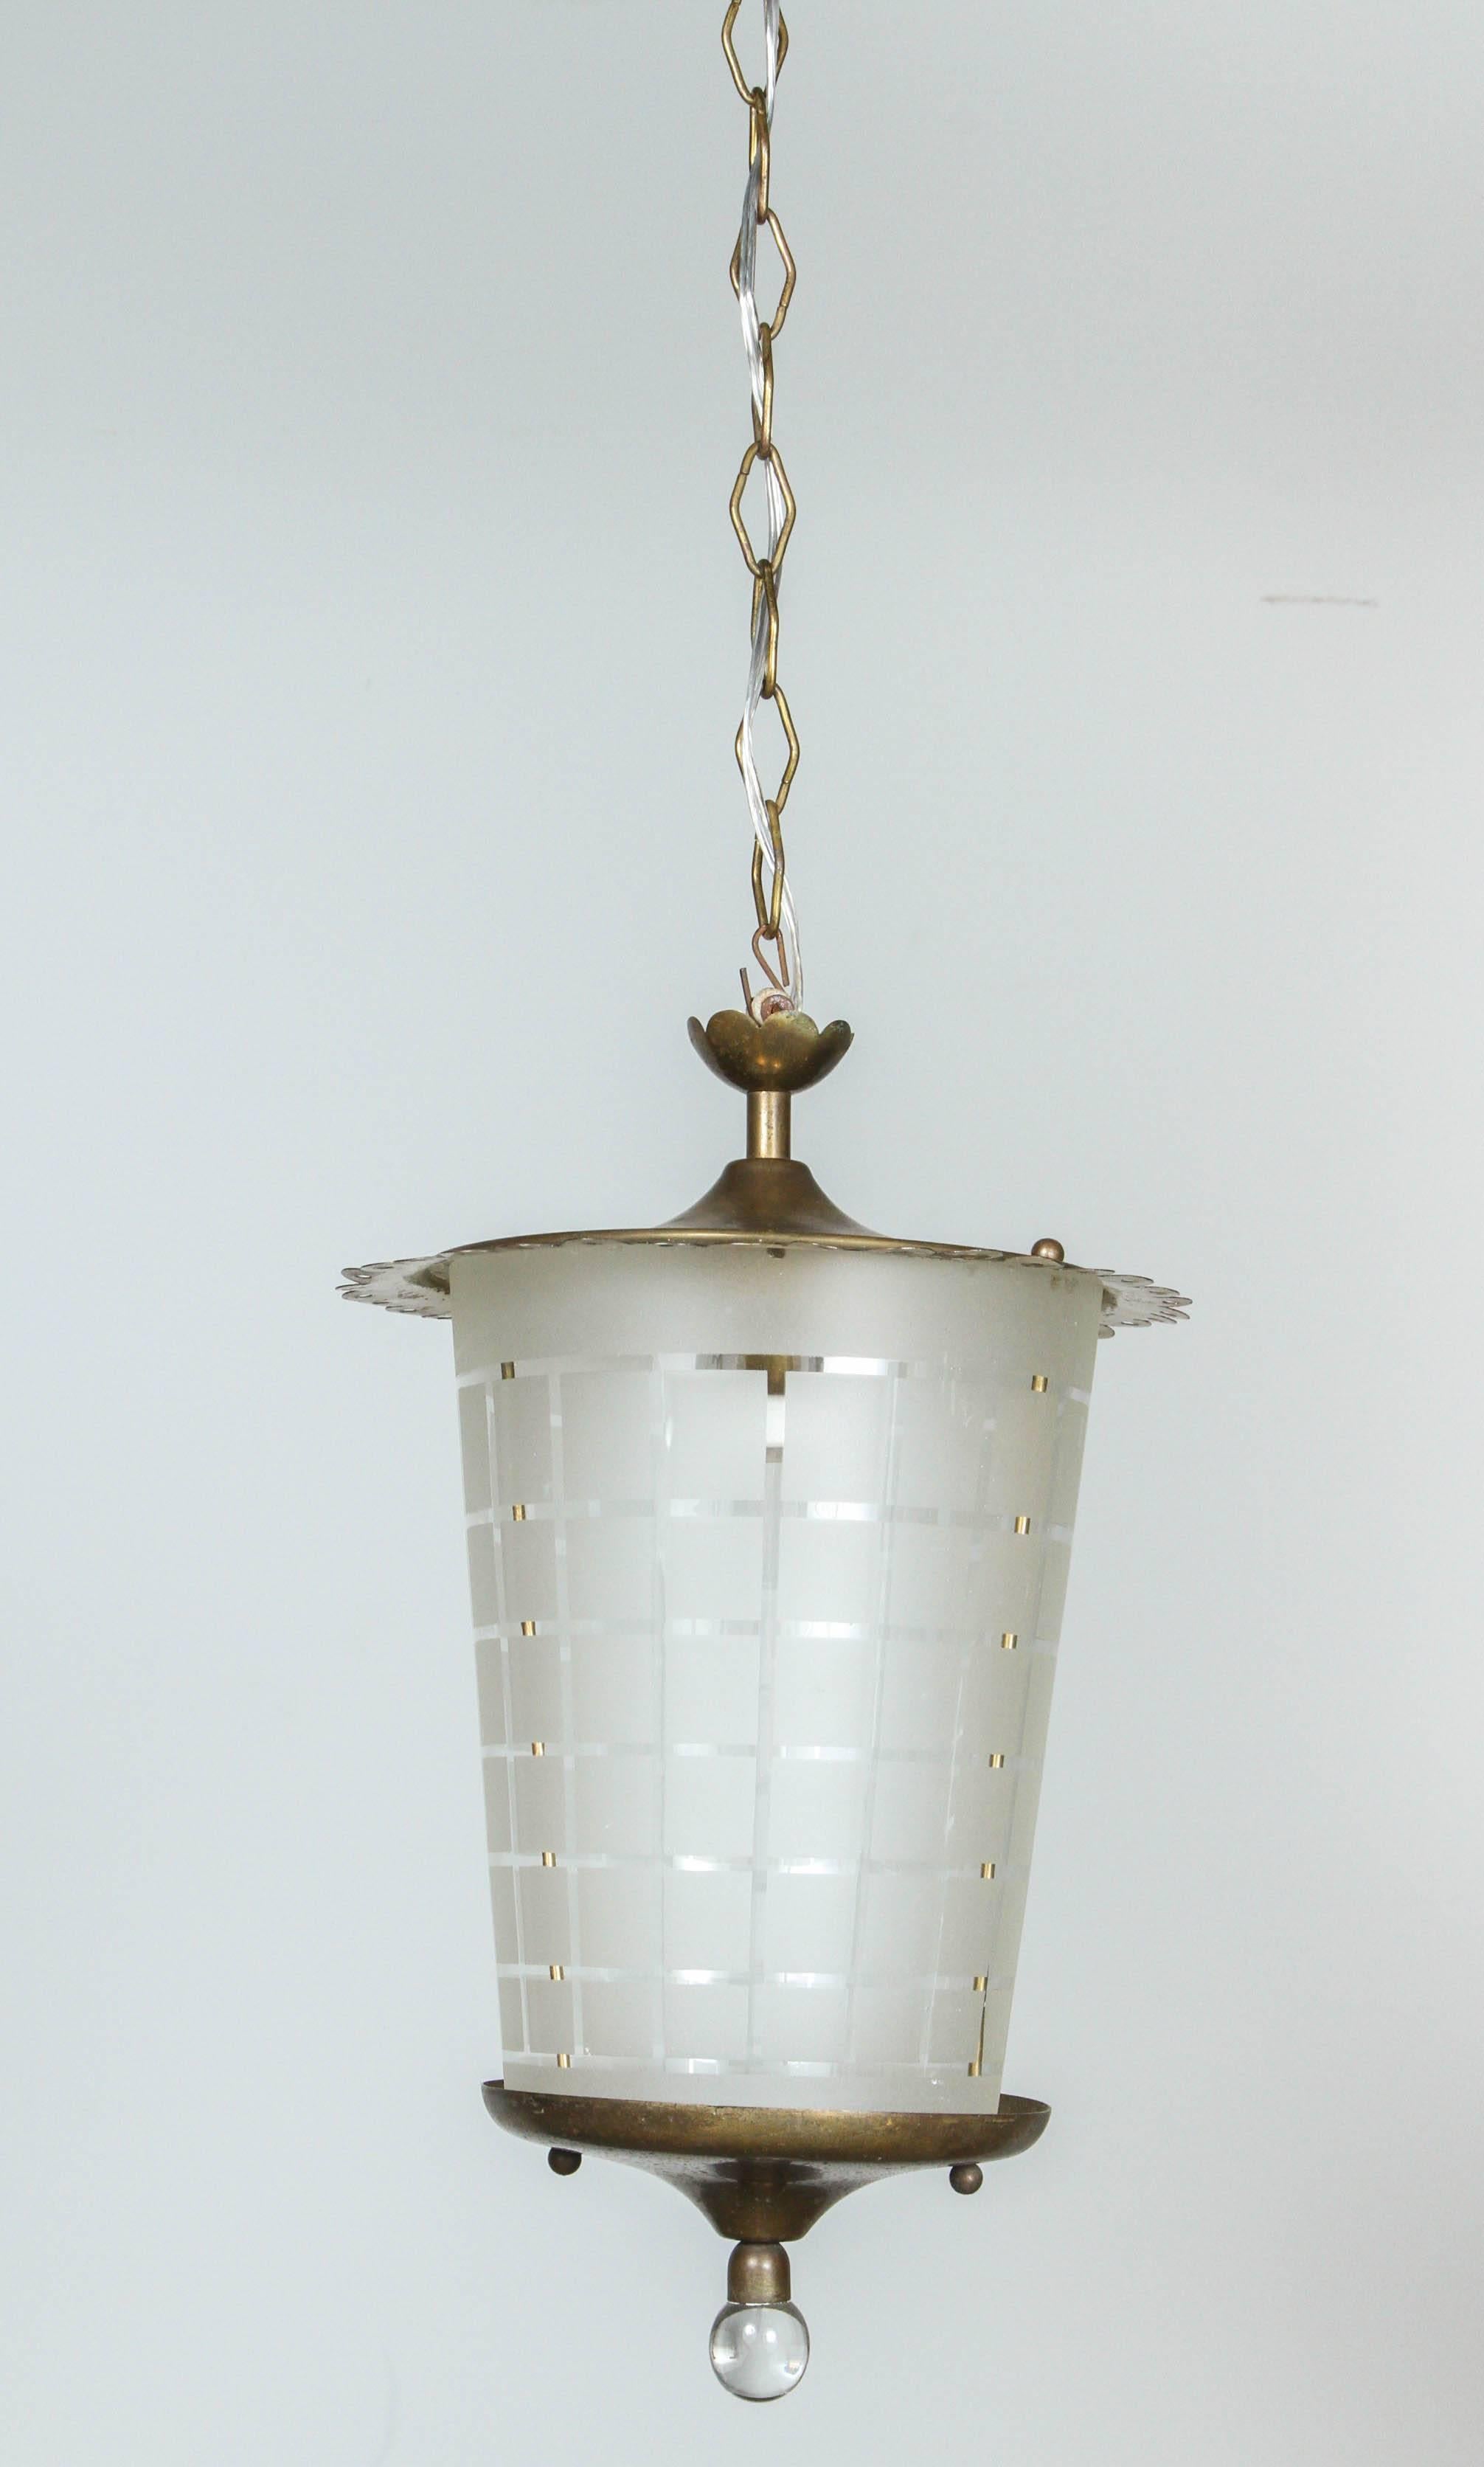 Vintage Italian brass and frosted glass lantern with scalloped details.